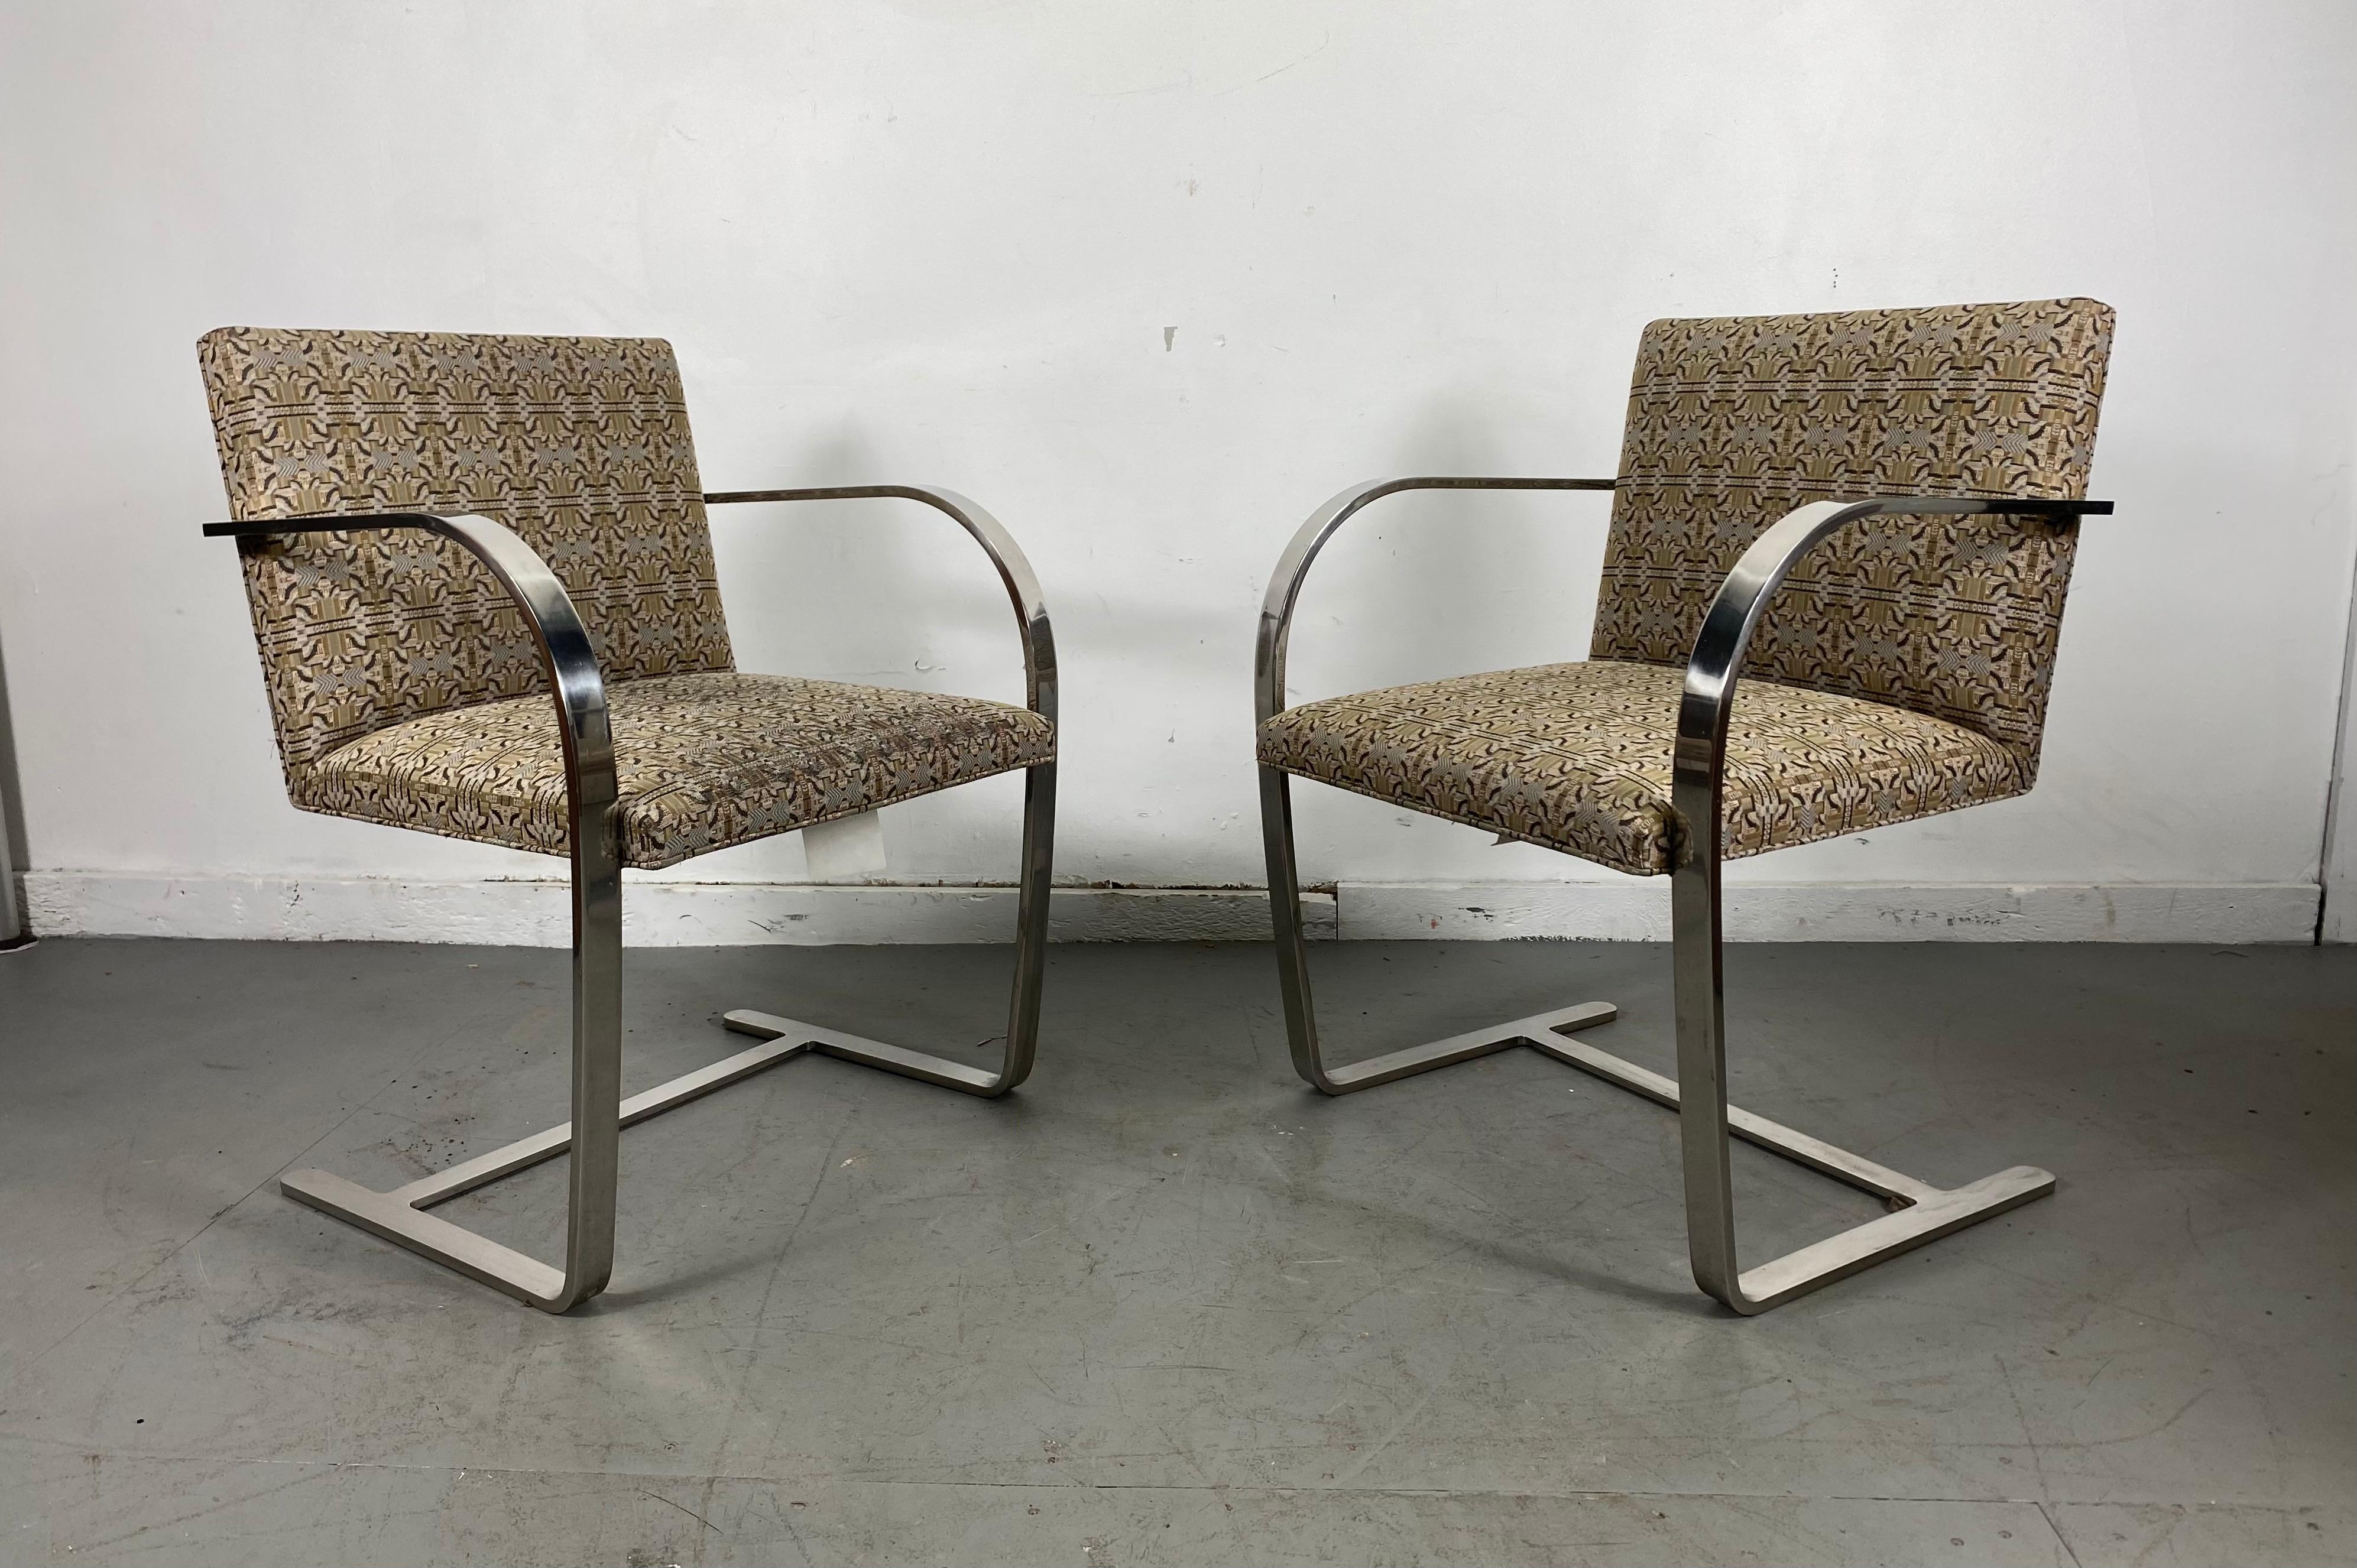 Steel Classic Pair of Brno Chairs Designed by Mies Van Der Rohe for Knoll